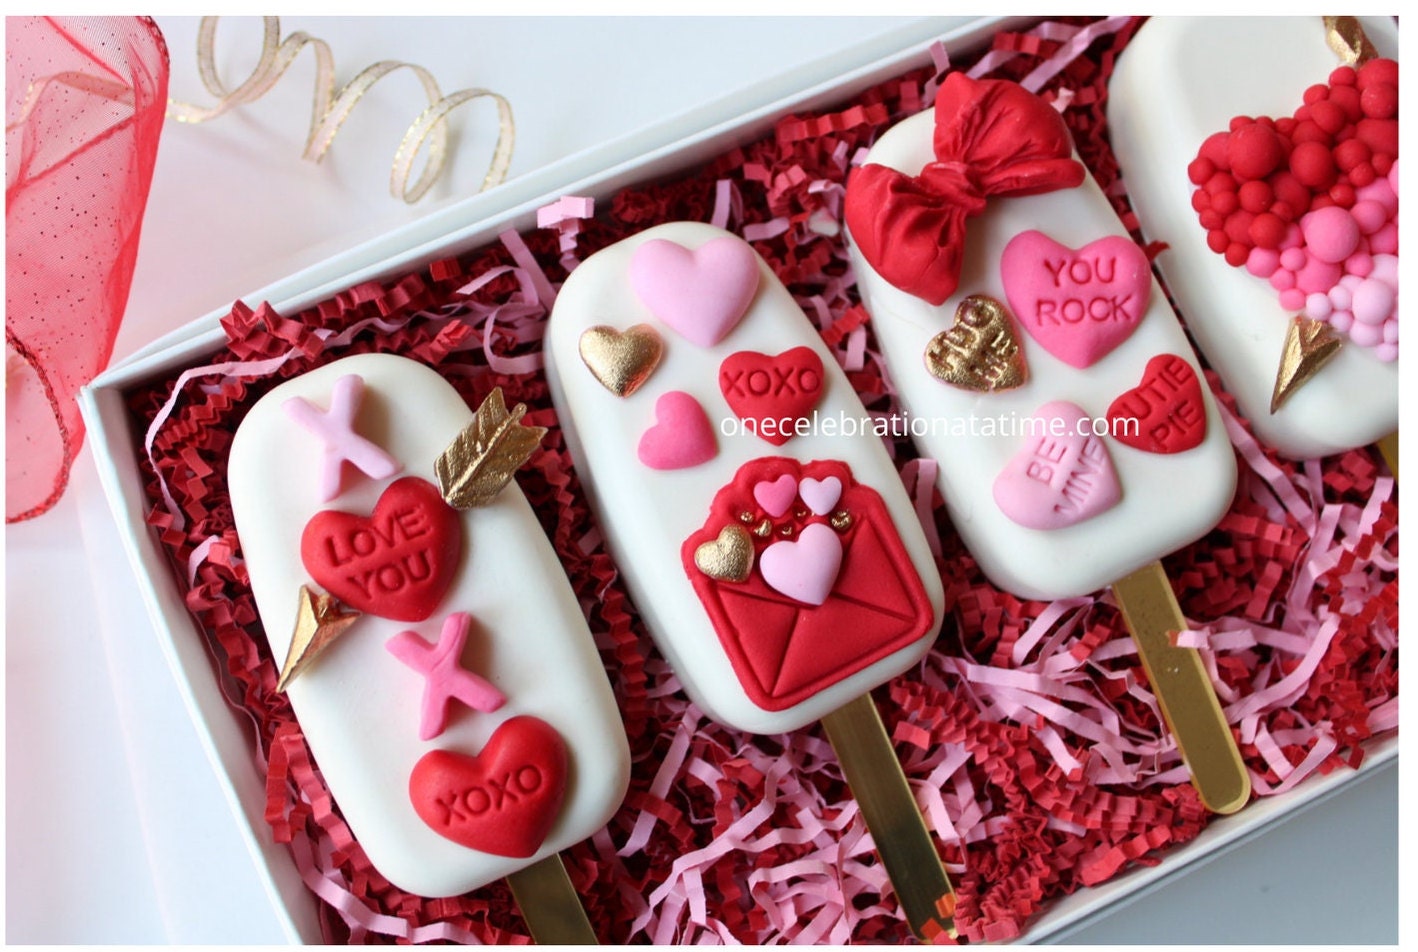 Engraved Valentine's Day Cakesicle/Popsicle Sticks (set of 12